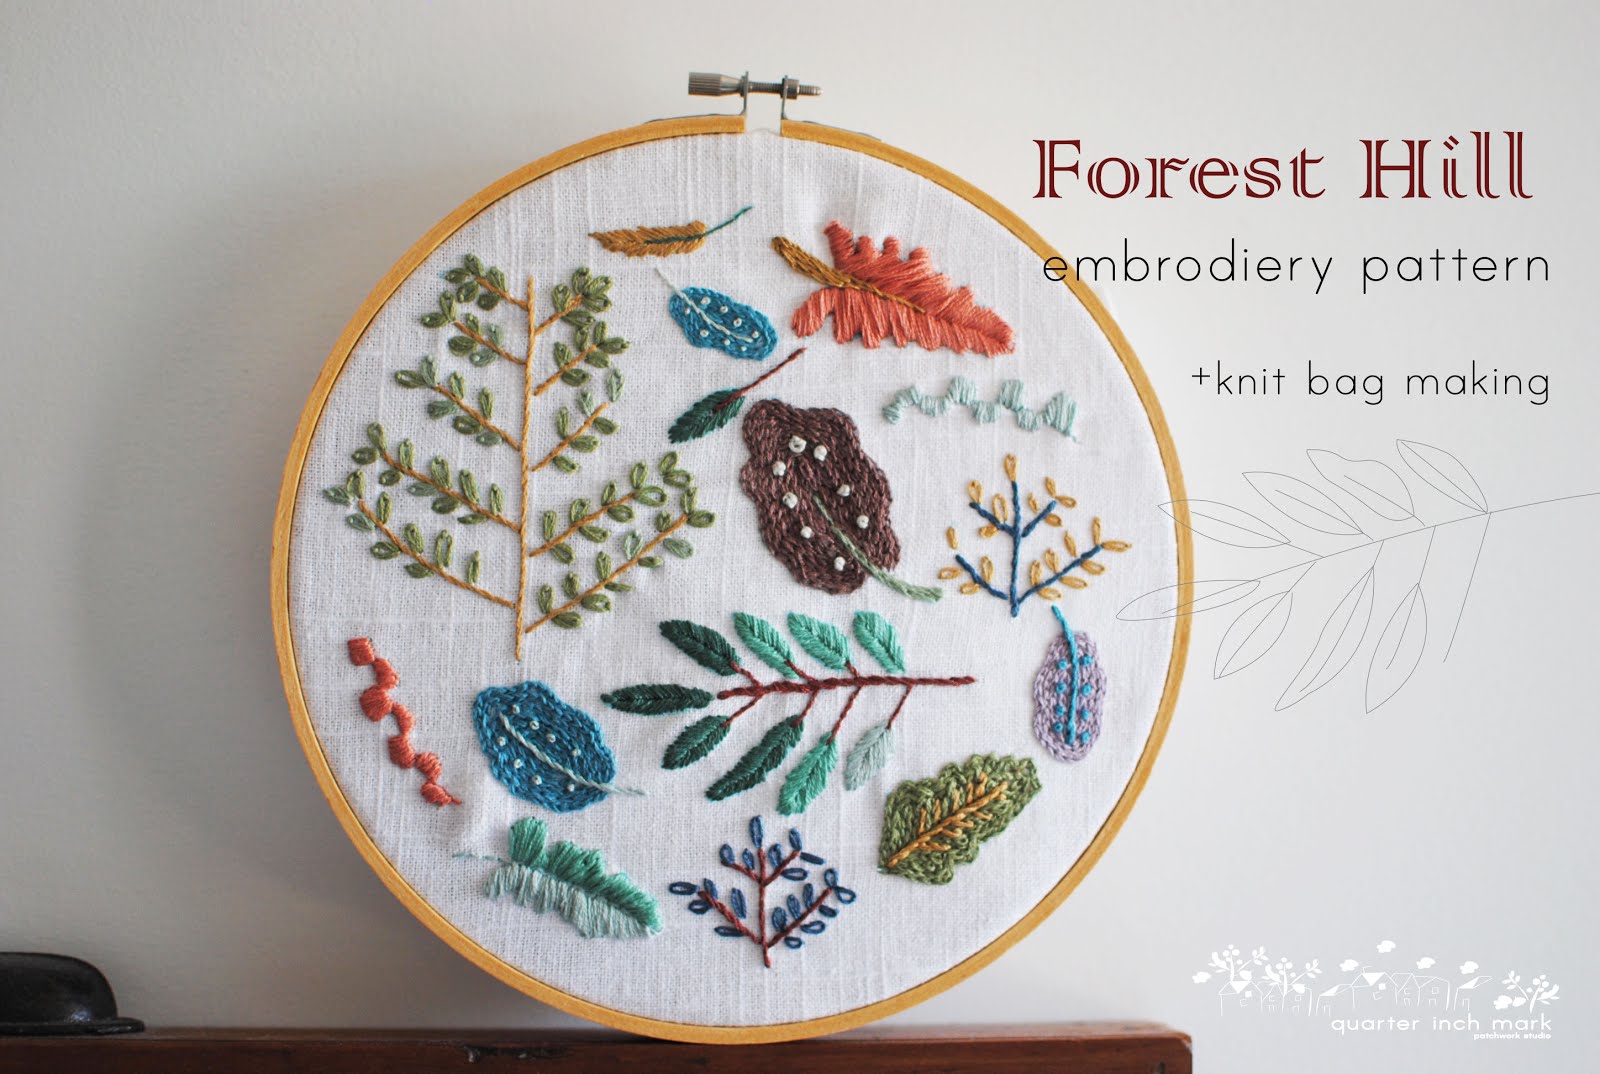 Forest Hill Embroidery Patter+knit bag making